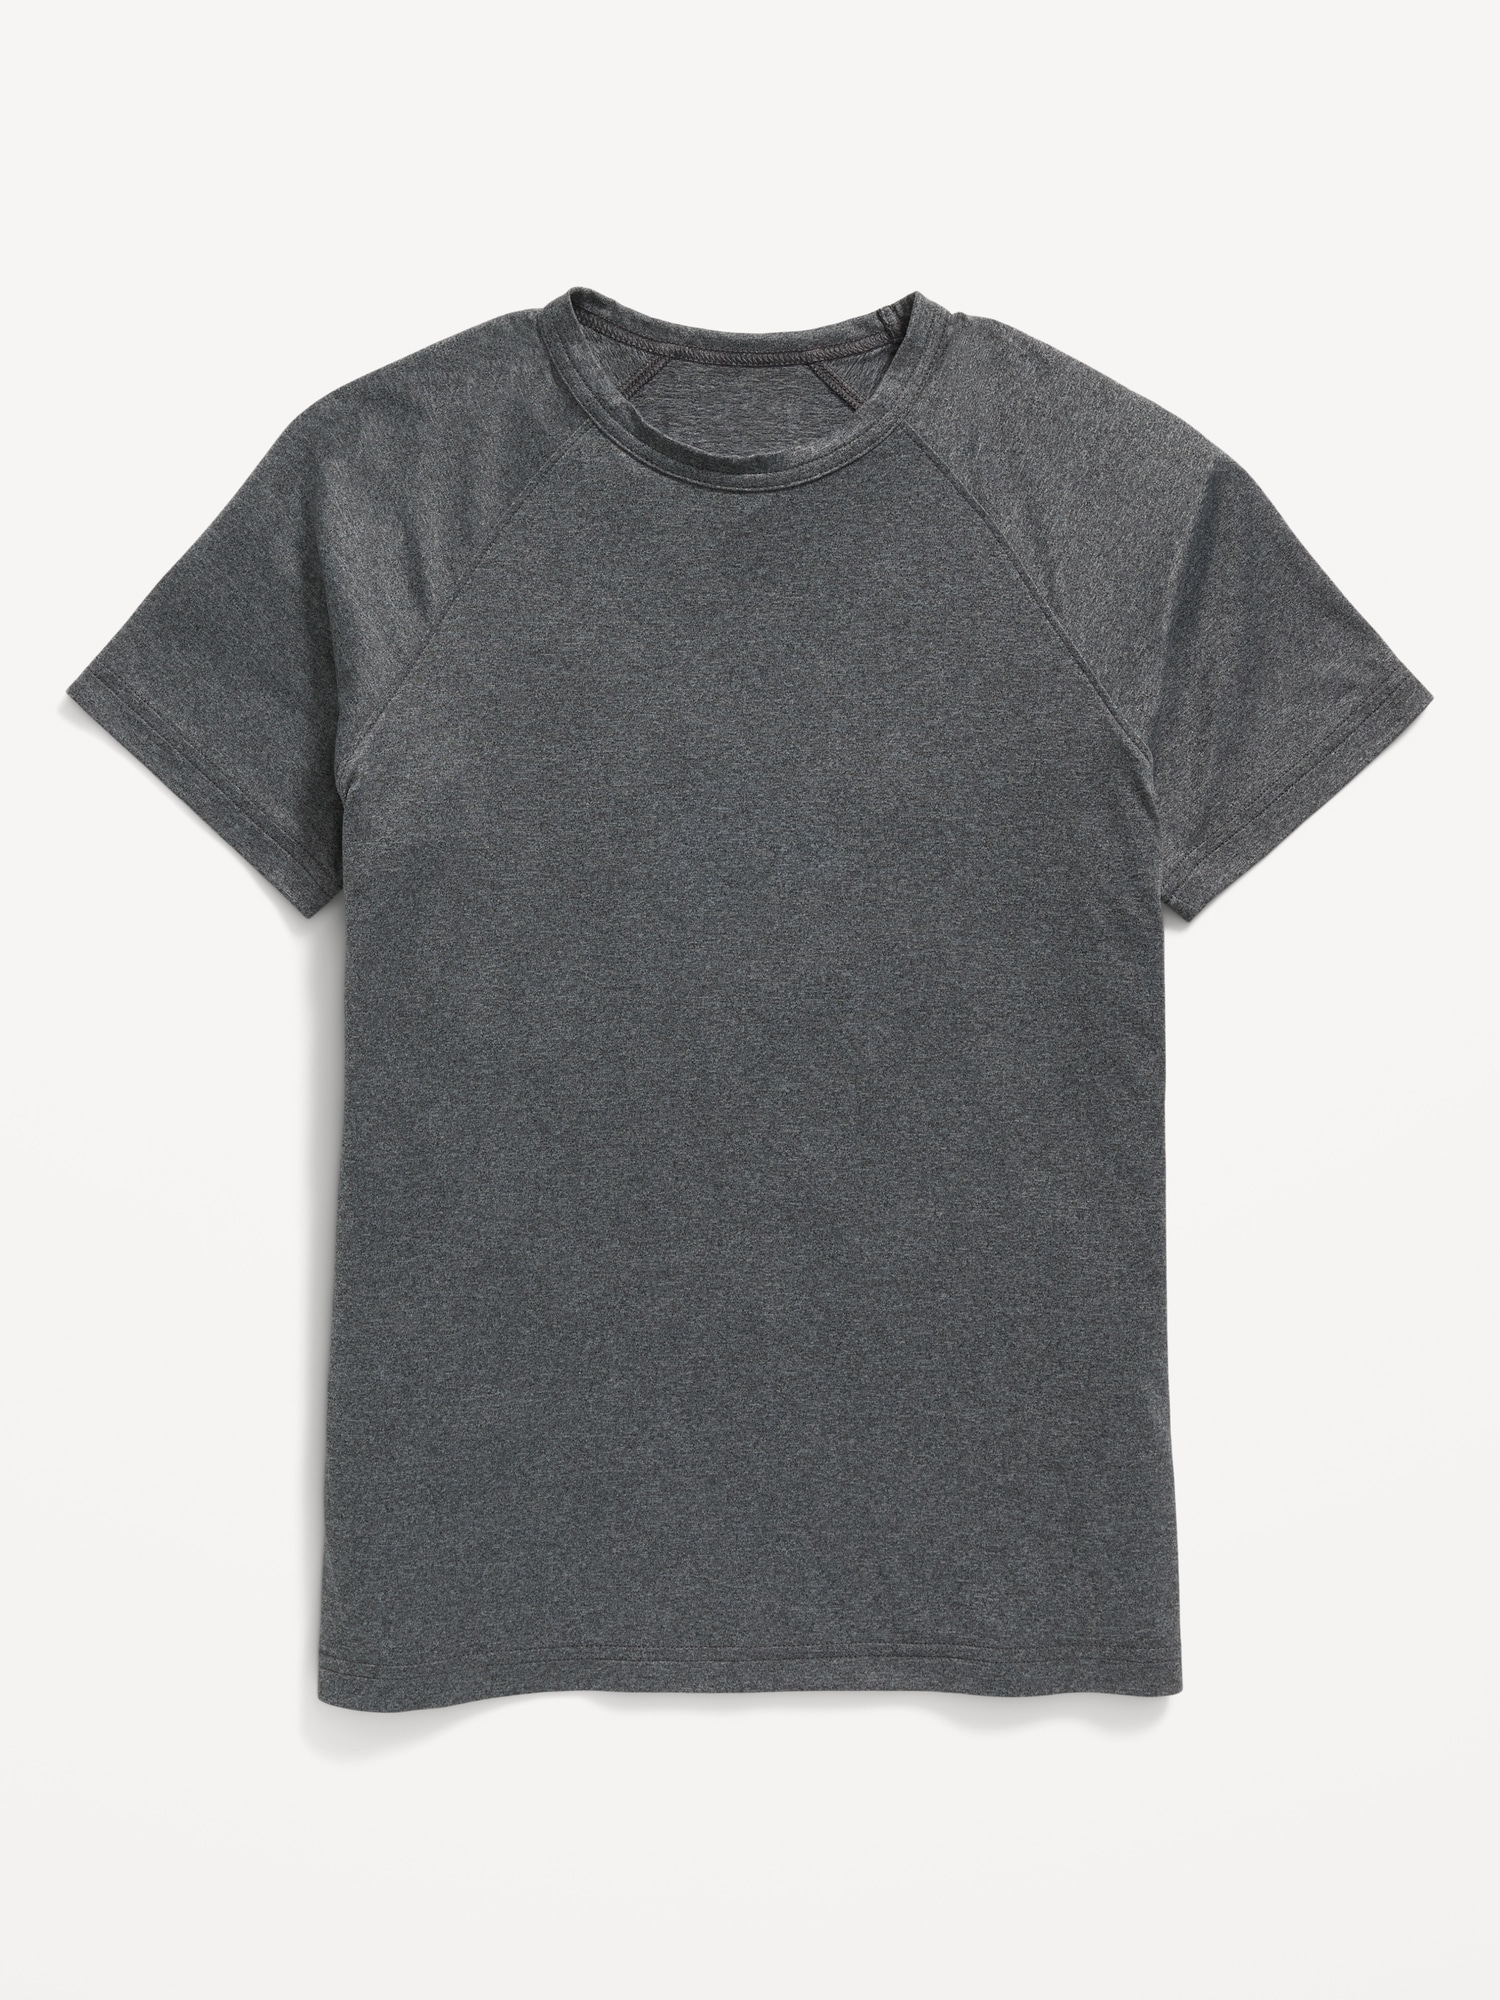 Old Navy Cloud 94 Soft Performance T-Shirt for Boys gray. 1